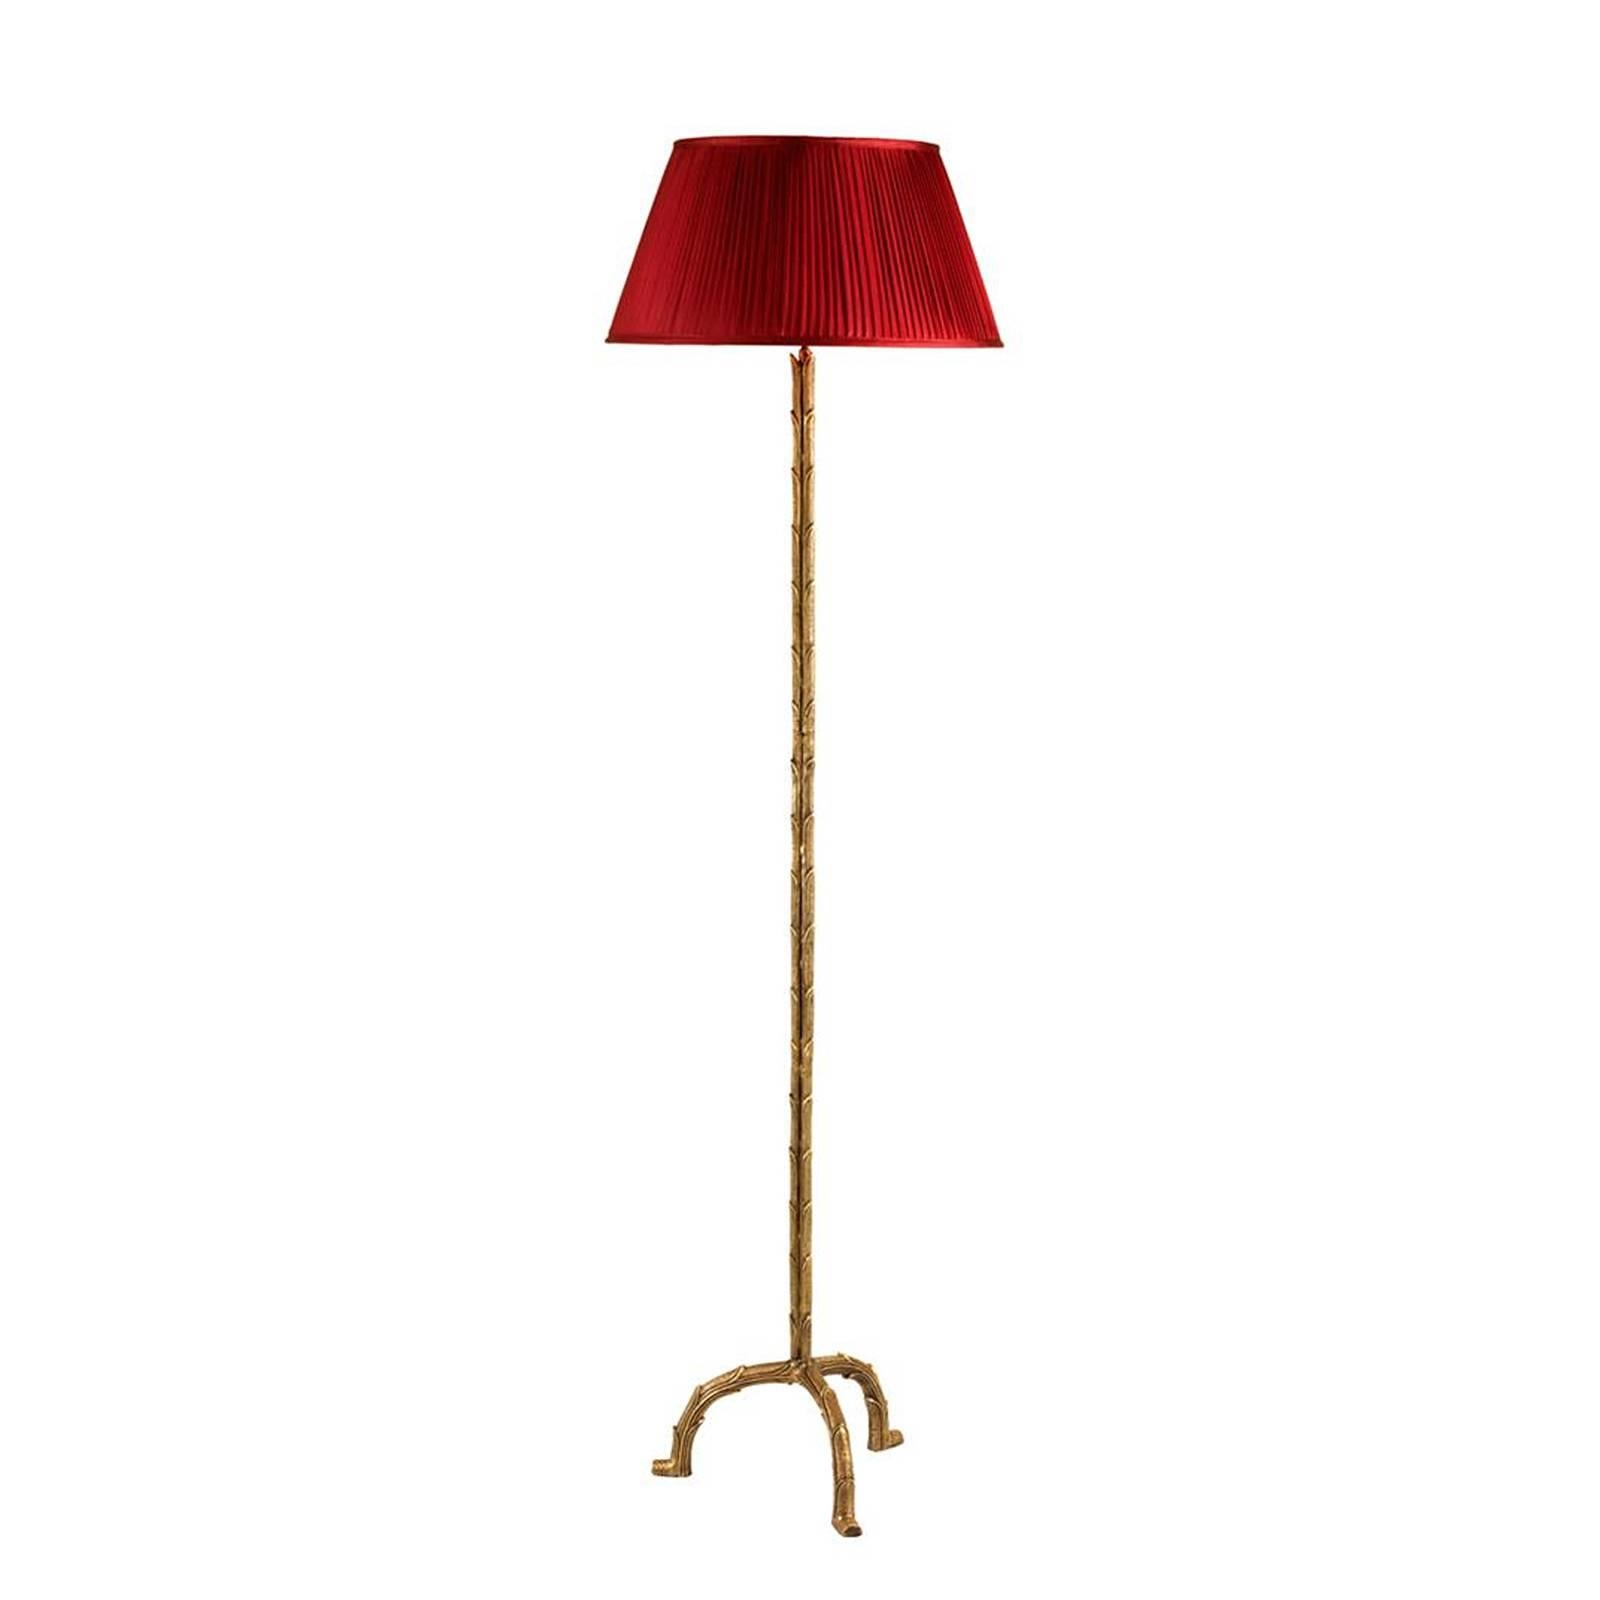 Floor lamp Chambon in vintage brass finish.
Including pleated black shade. One bulb lamp 
holder type E27, max 40 watt. Bulb not included.
Also available with pleated red shade.
